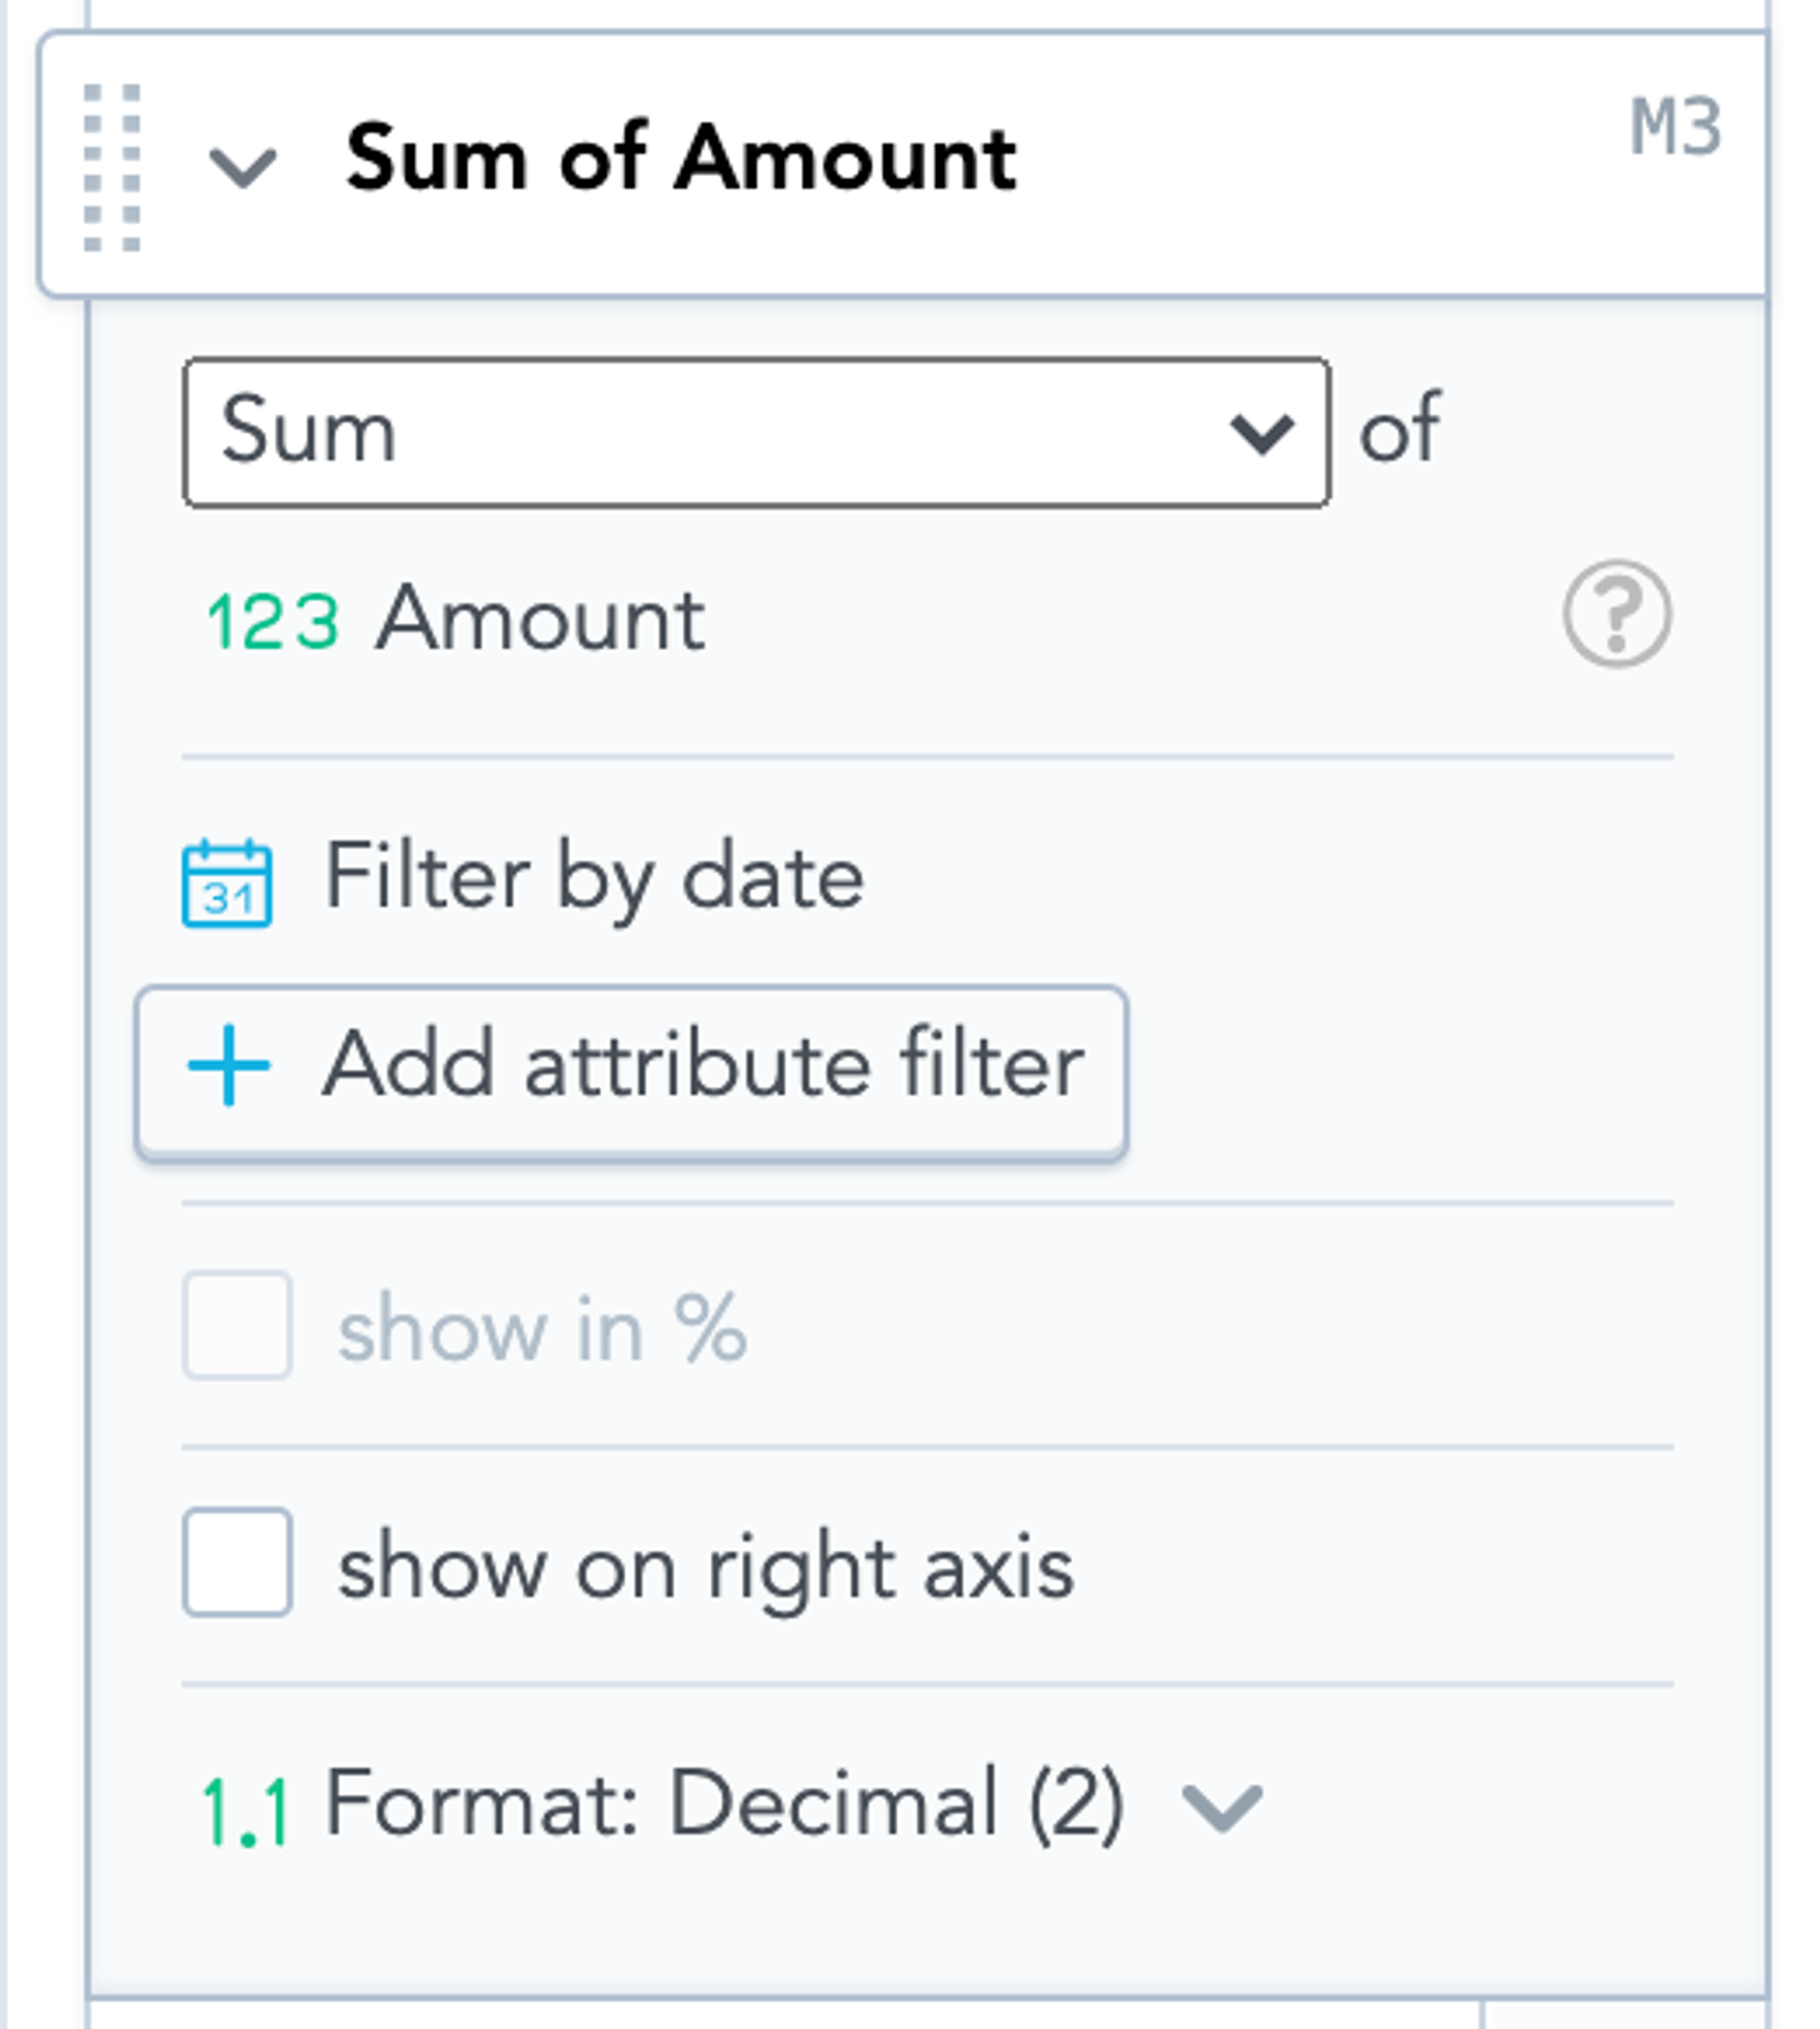 Instead of creating a new metric in MAQL with the filter covered there, you can simply select attribute values, which will impact only the chosen metrics.